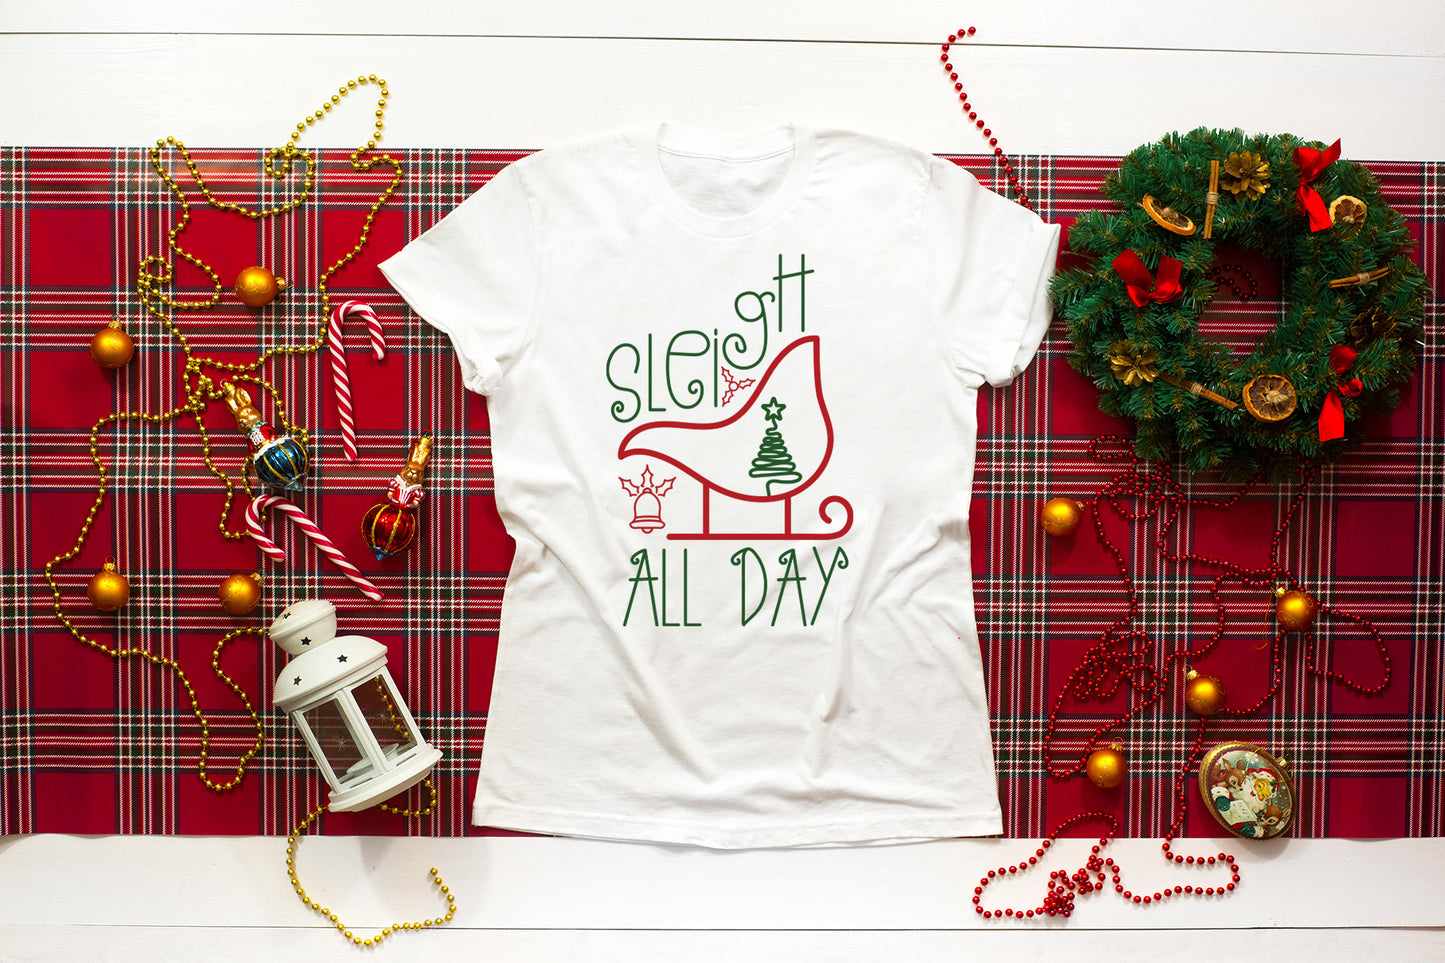 Holly Jolly - A Handlettered Christmas Font